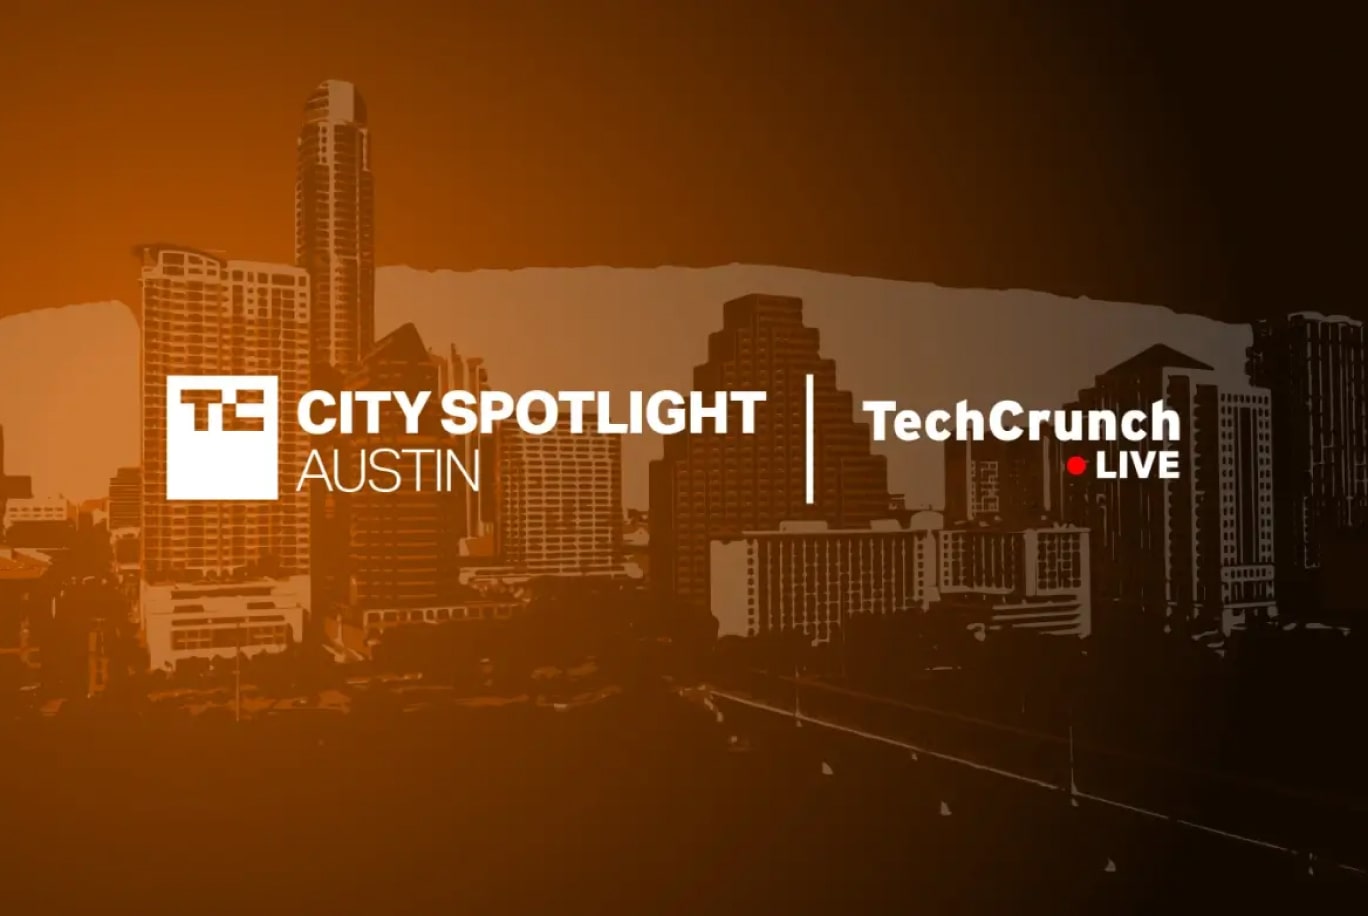 Austin emerges as a city of unicorns and tech giants